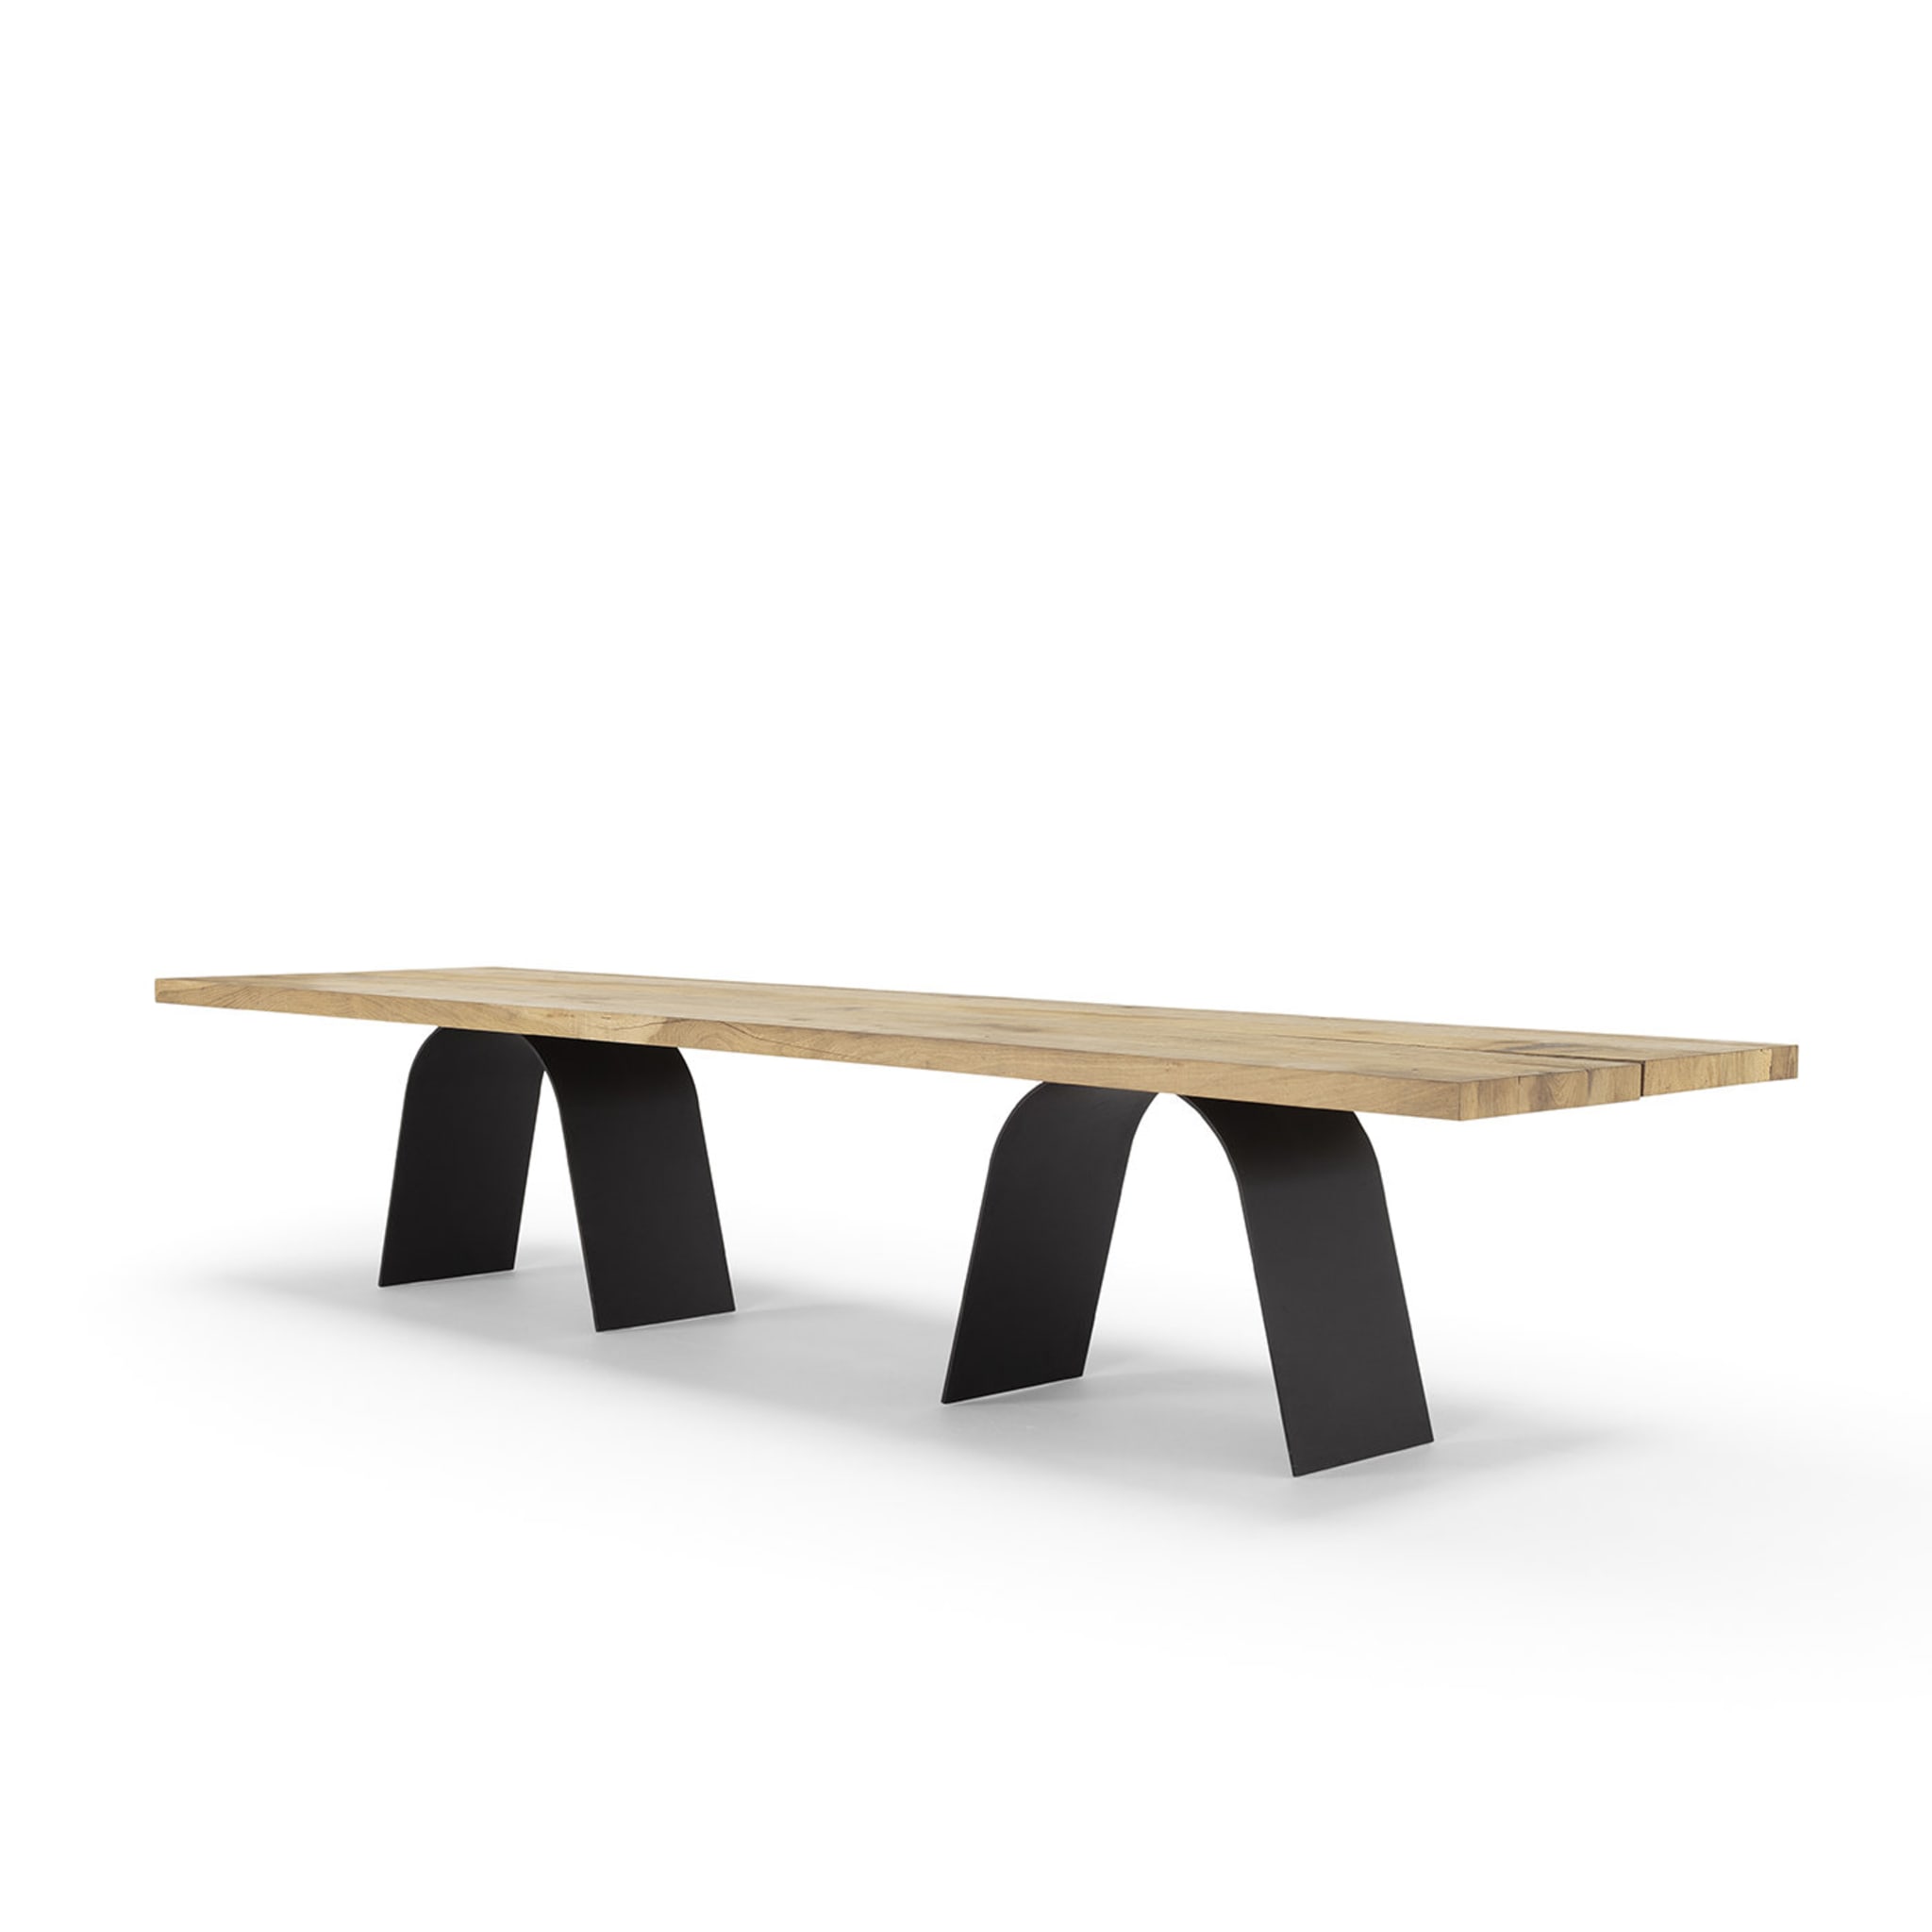 Desco Dining Table By Anton Cristell and Emanuel Gargano - Alternative view 1